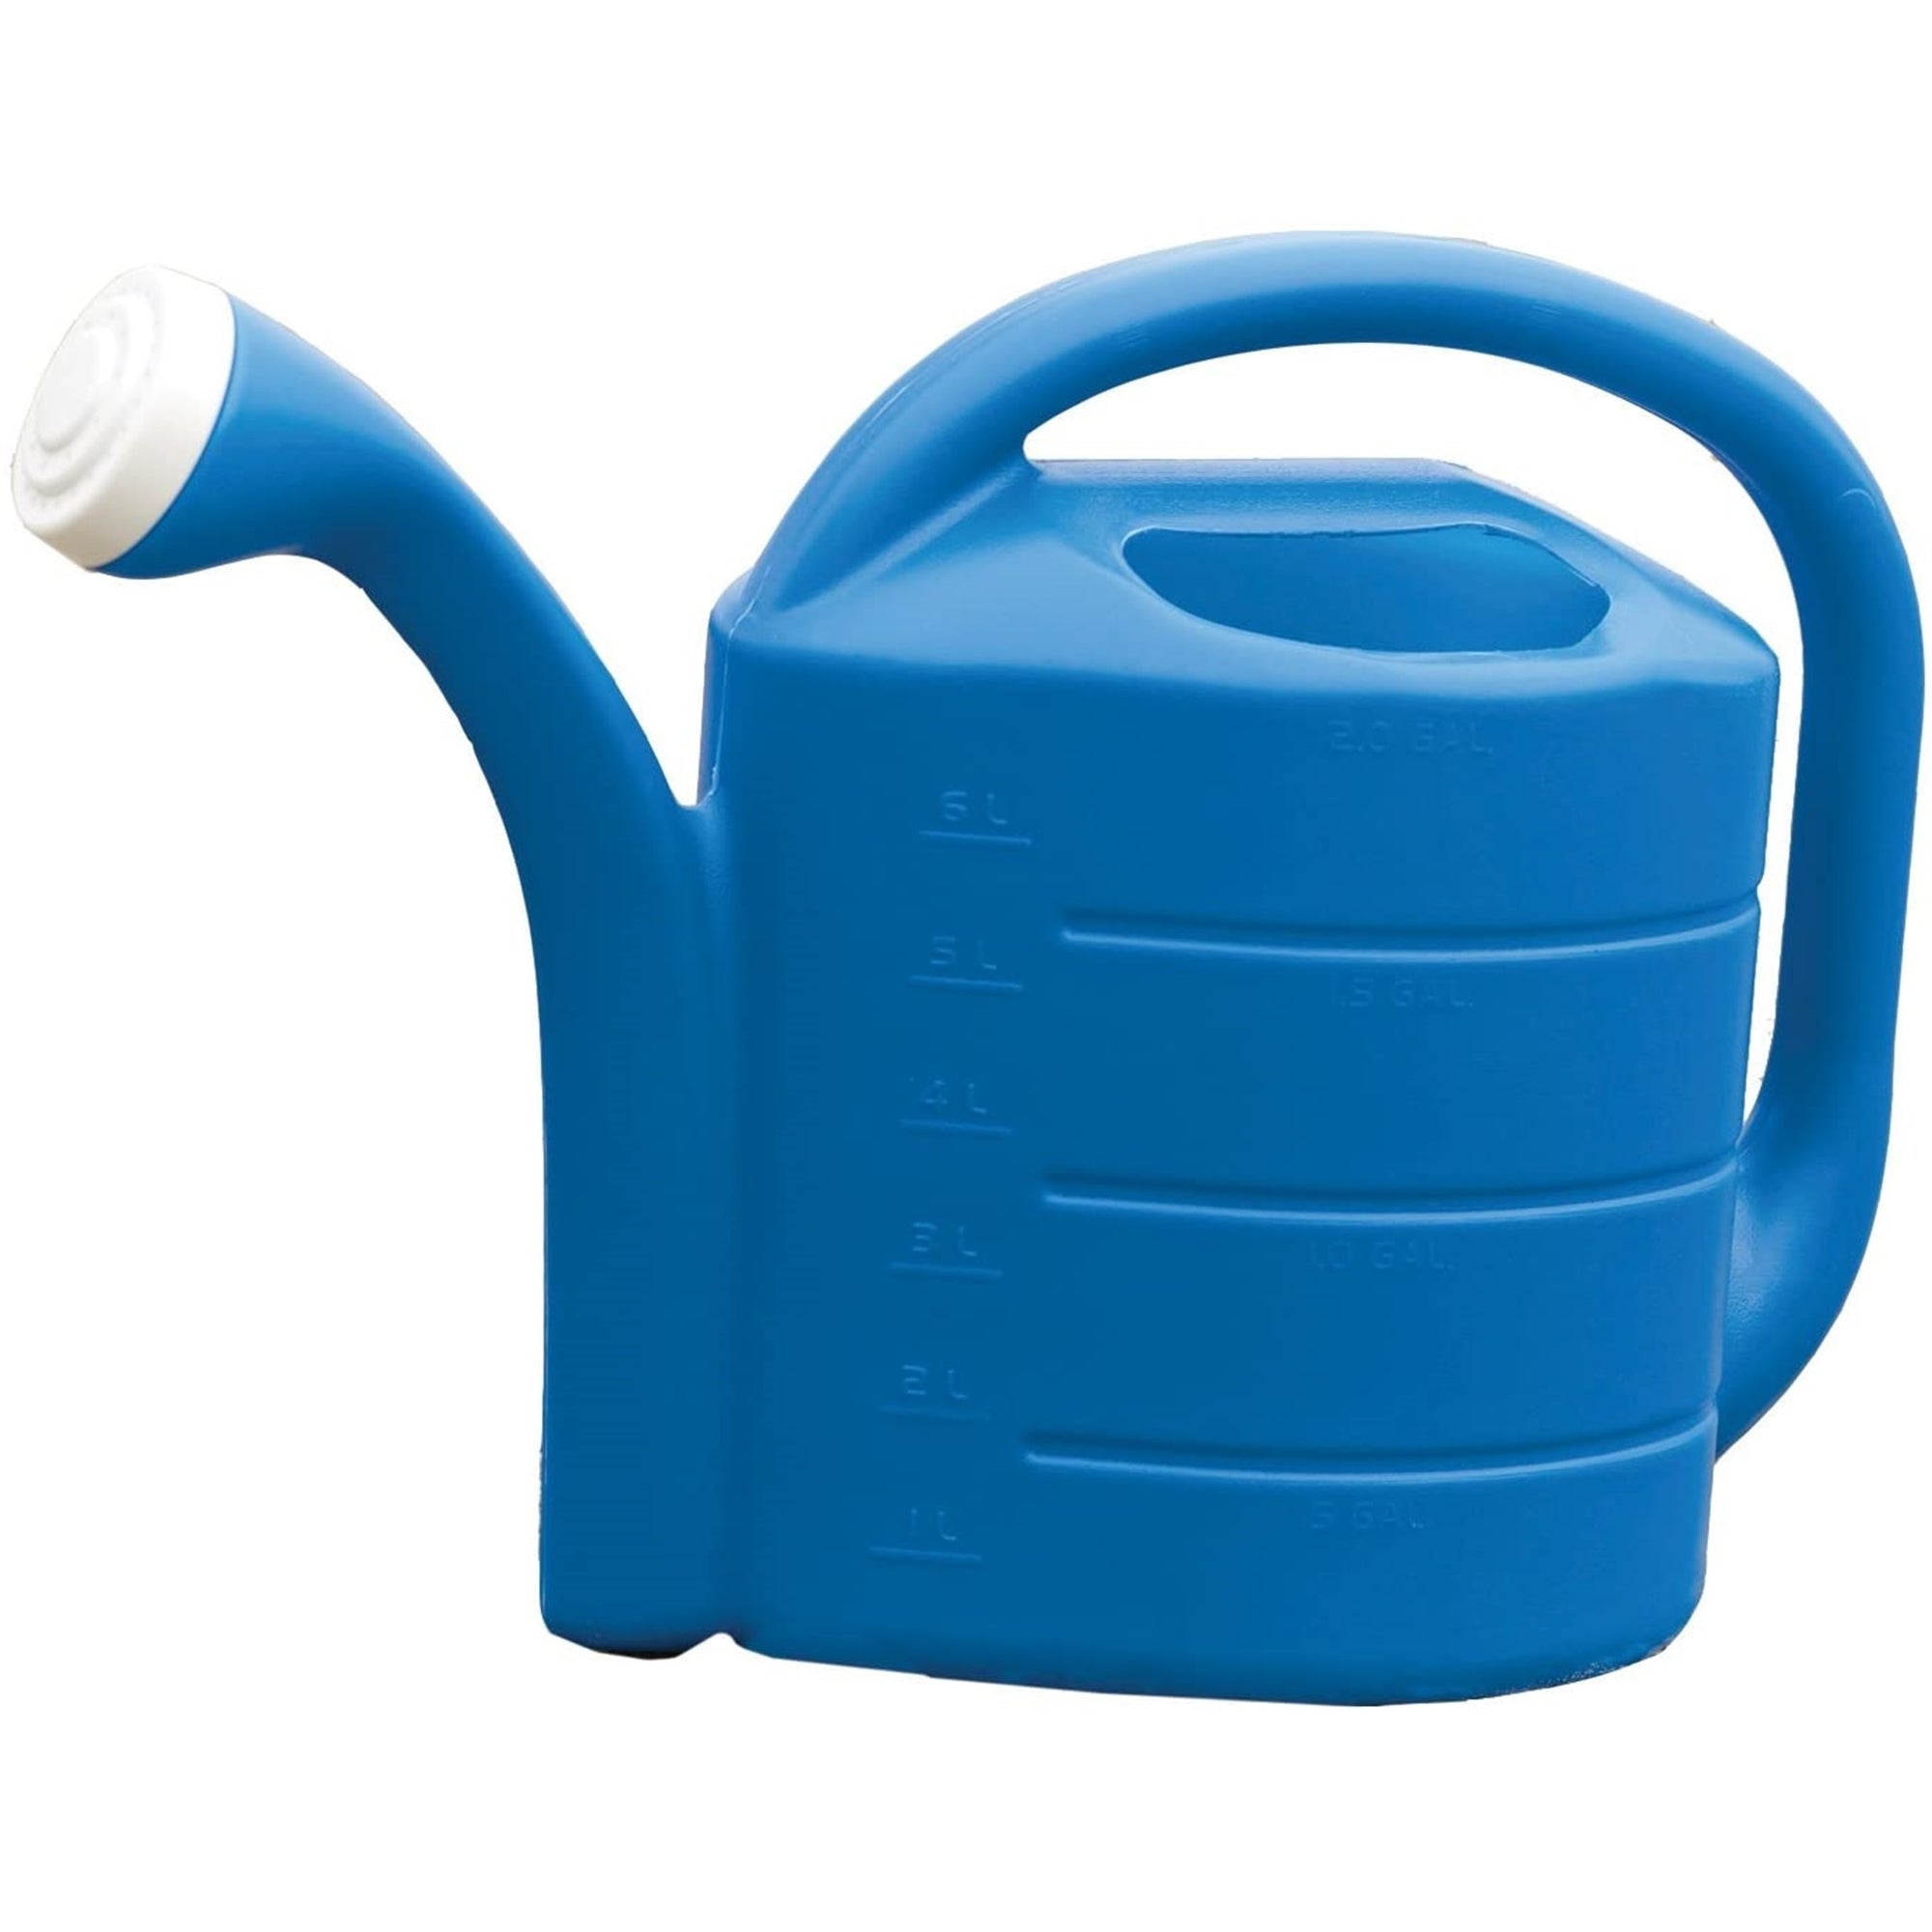 Novelty Deluxe Plastic Watering Can, Bright Blue, 2 Gallons